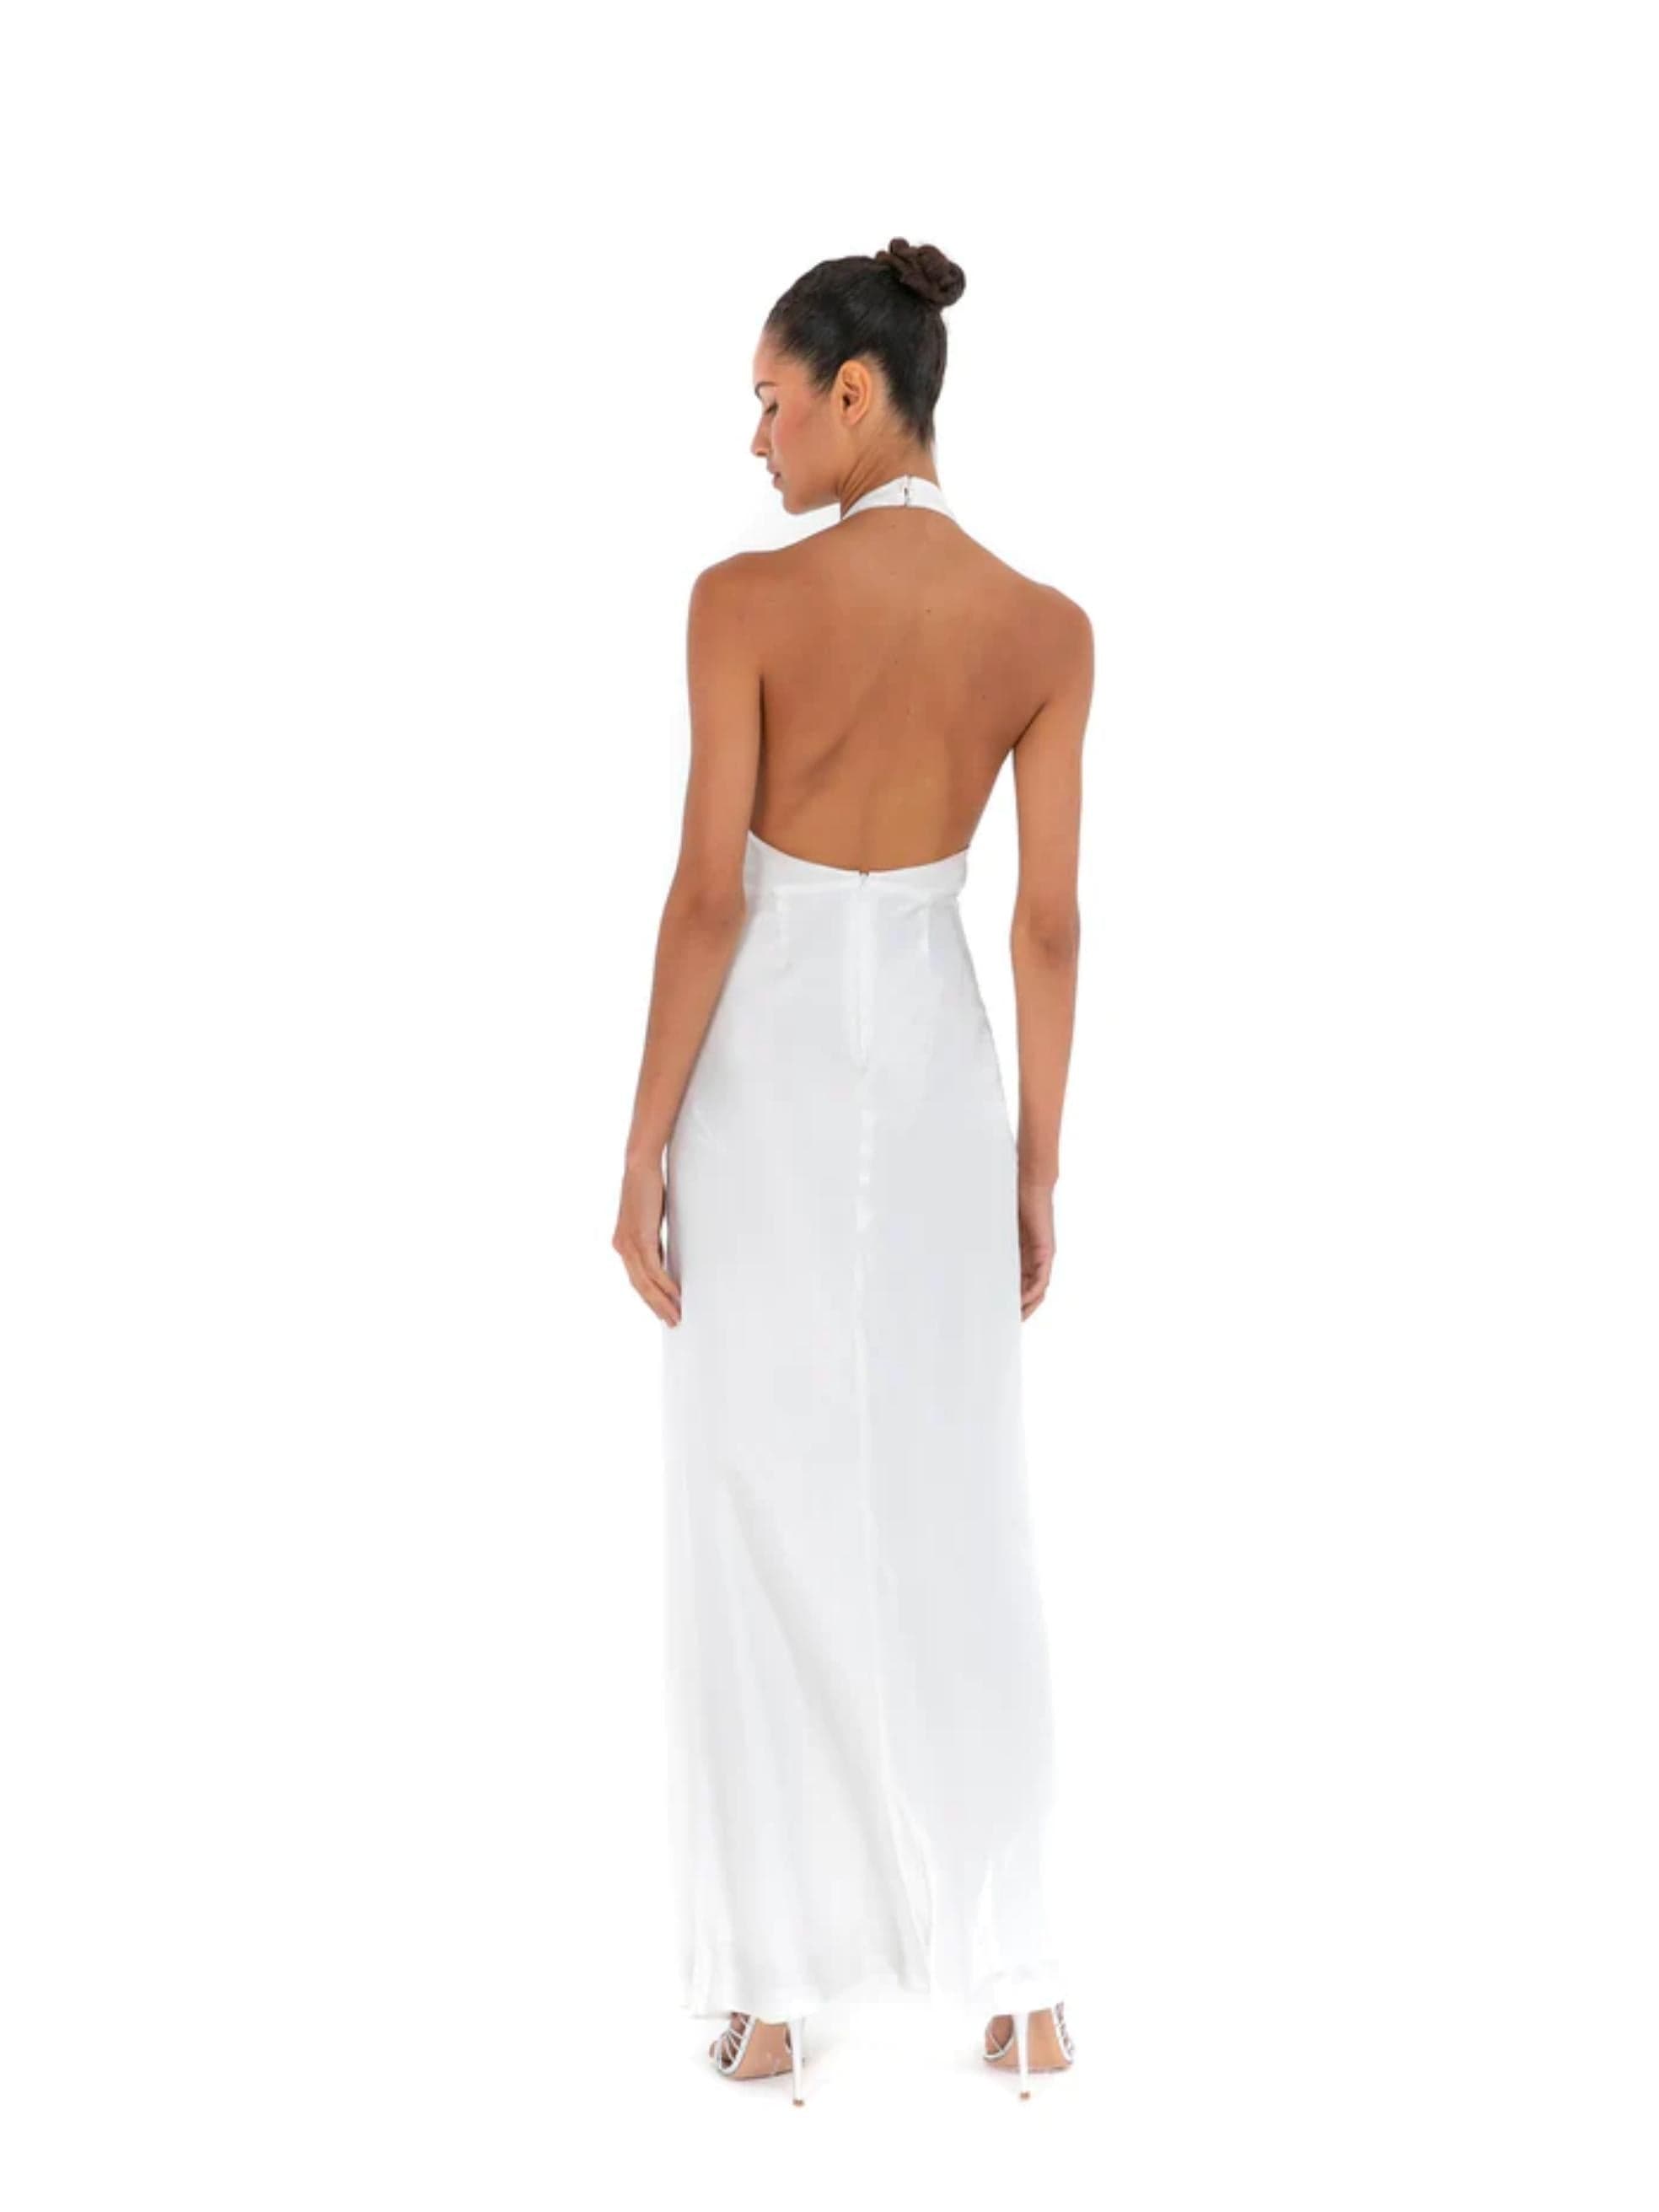 Grayson Gown in Blanc